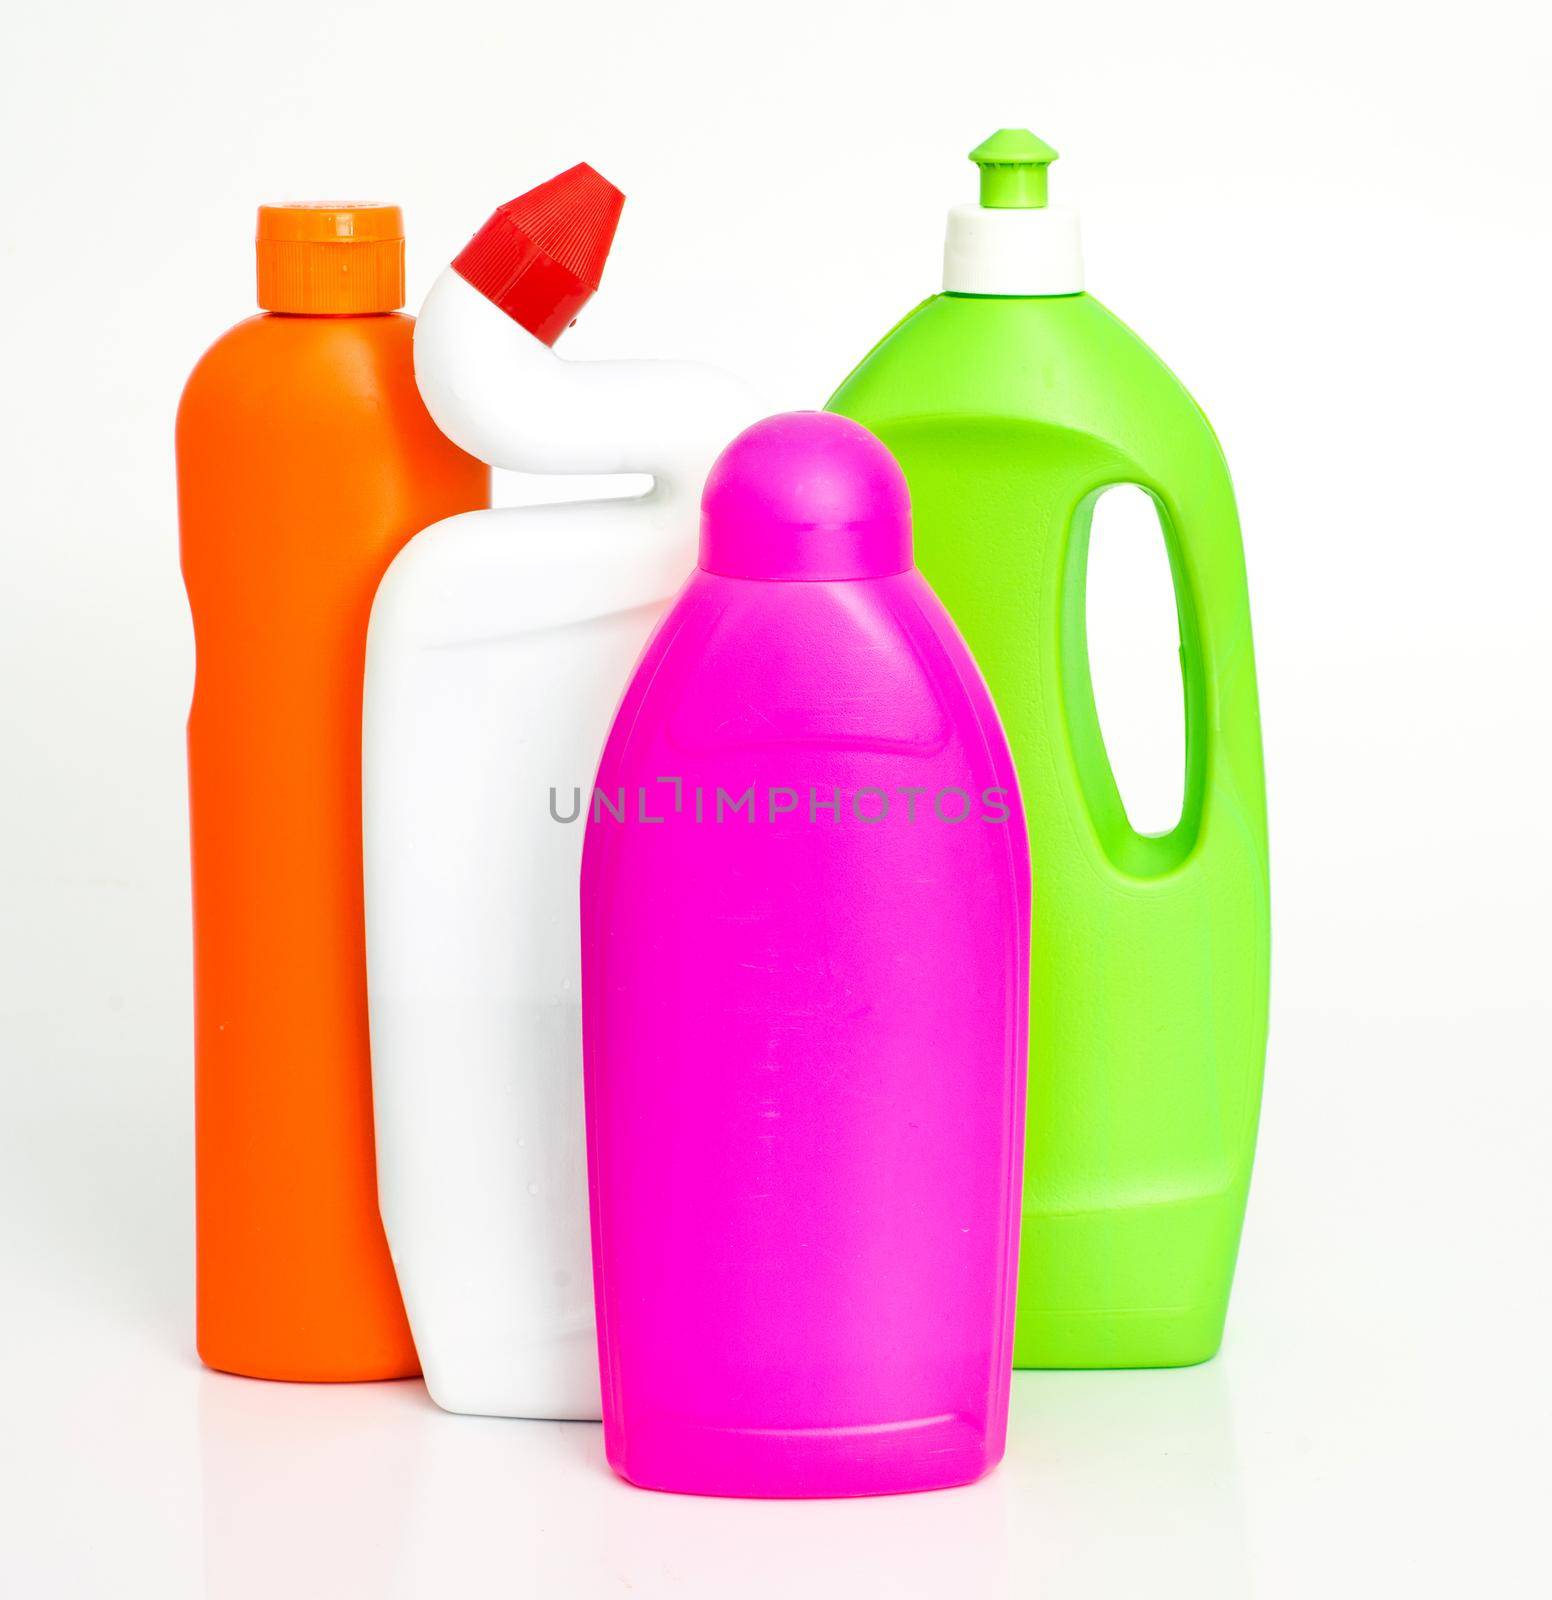 cleaning supplies isolated over white background